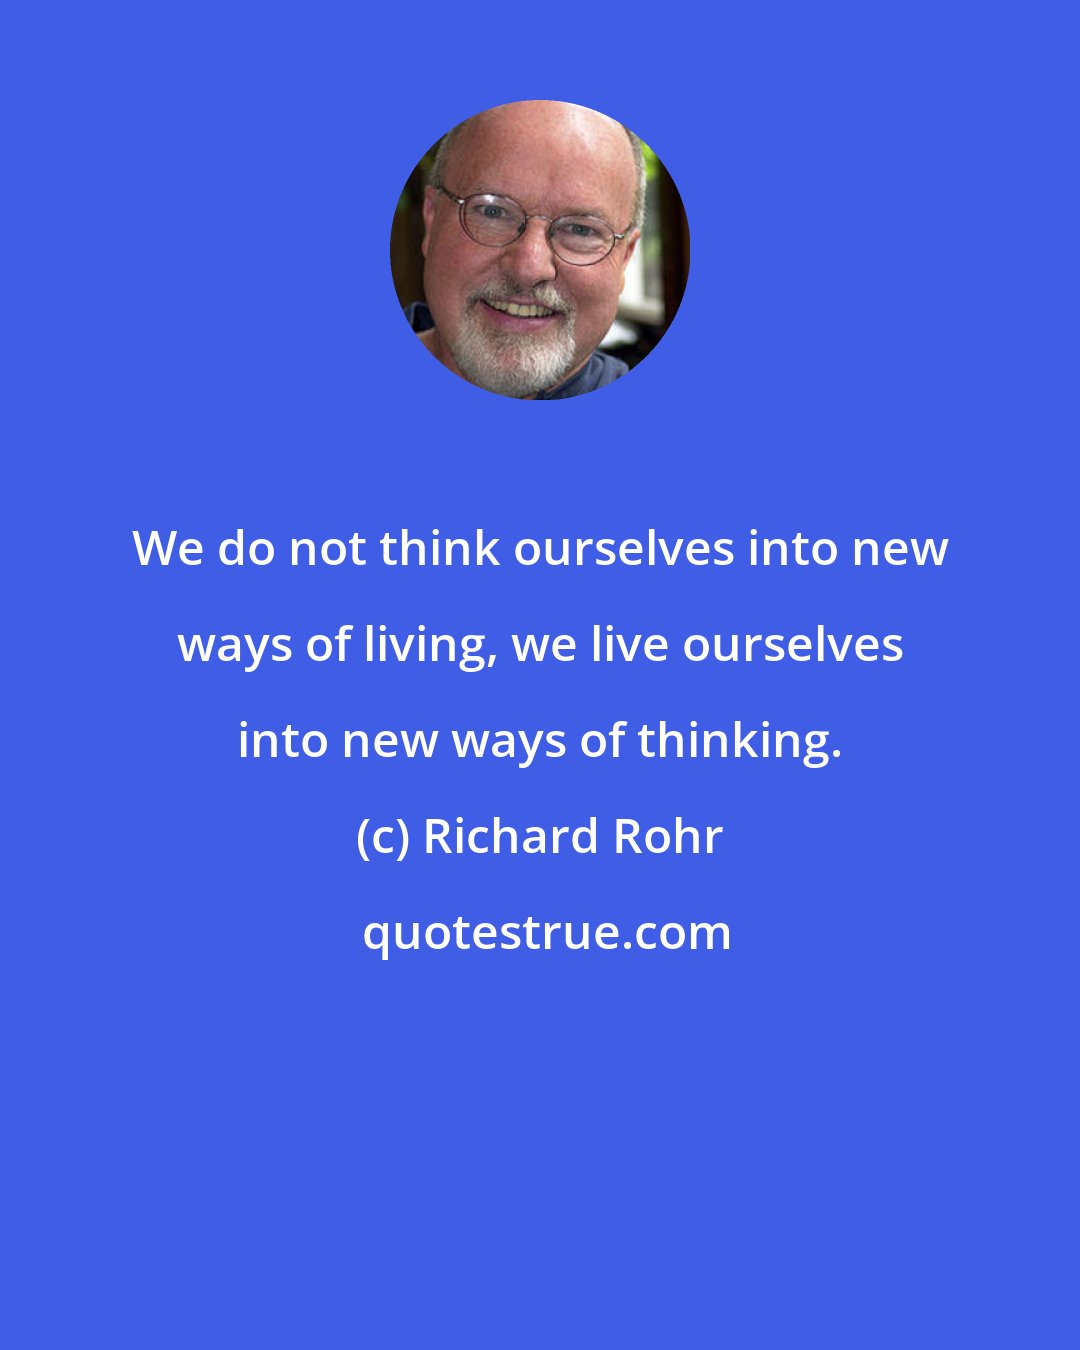 Richard Rohr: We do not think ourselves into new ways of living, we live ourselves into new ways of thinking.